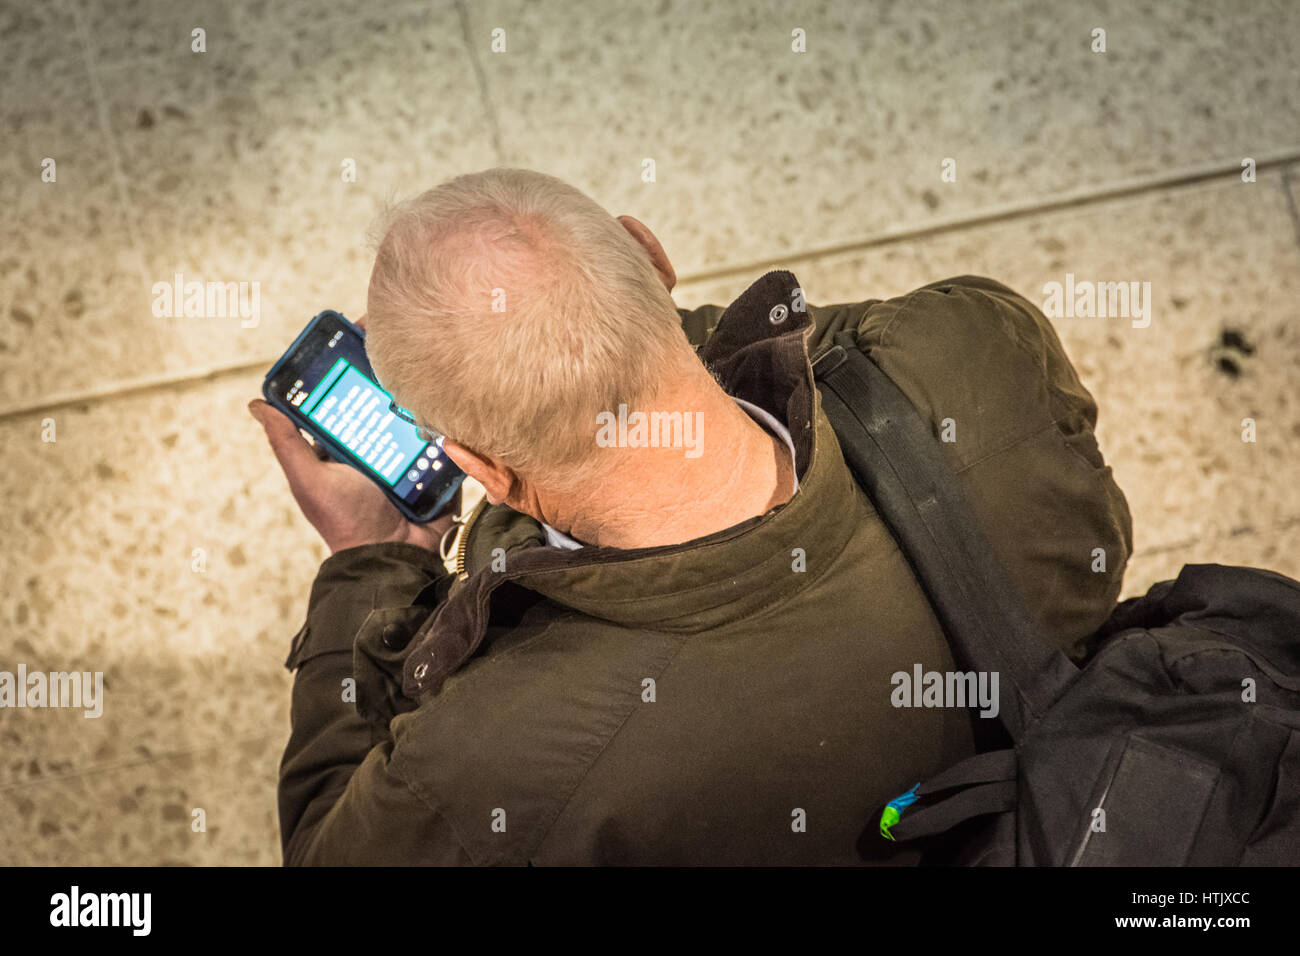 A man checking his mobile phone Stock Photo